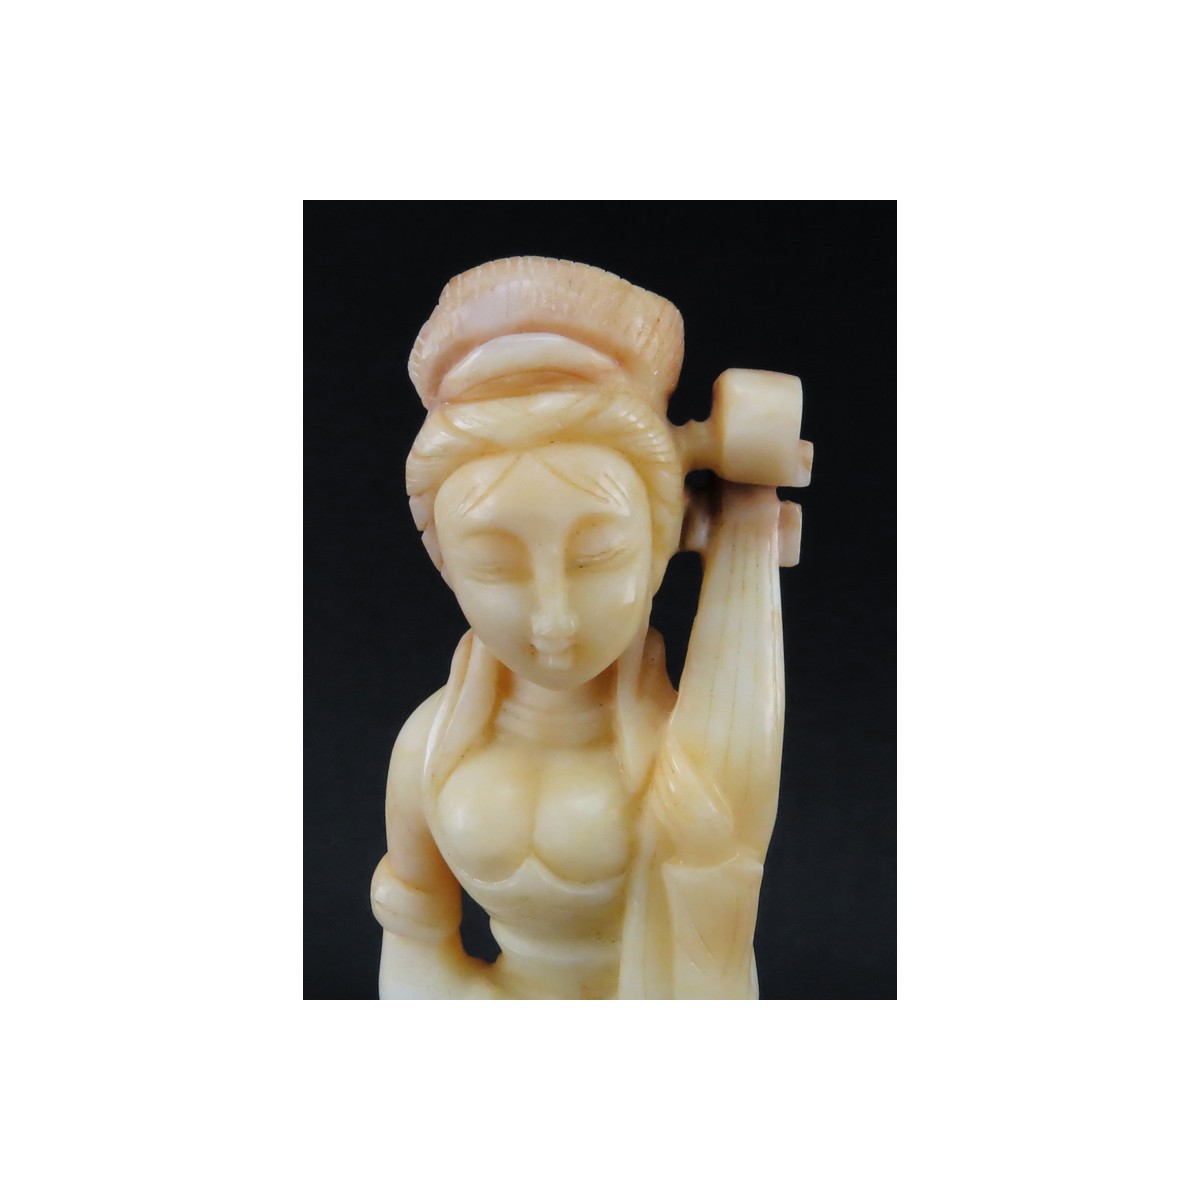 Vintage Chinese Carved Shoushan Figure Of A Woman. Unsigned. Minor edge chips or in good condition.